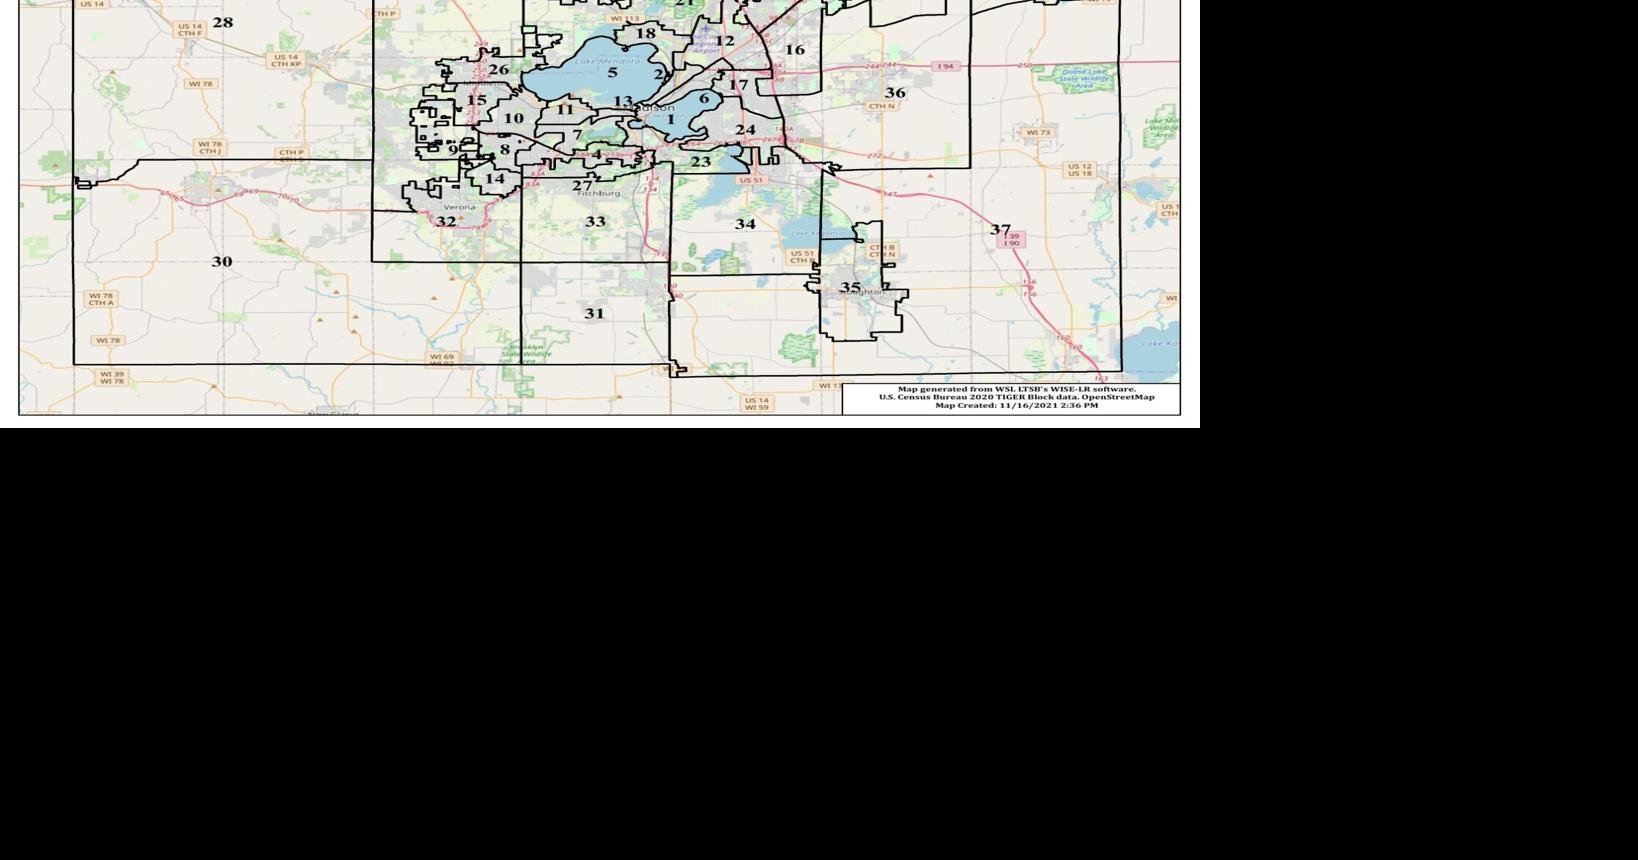 Dane County Board adopts new district map by nonpartisan